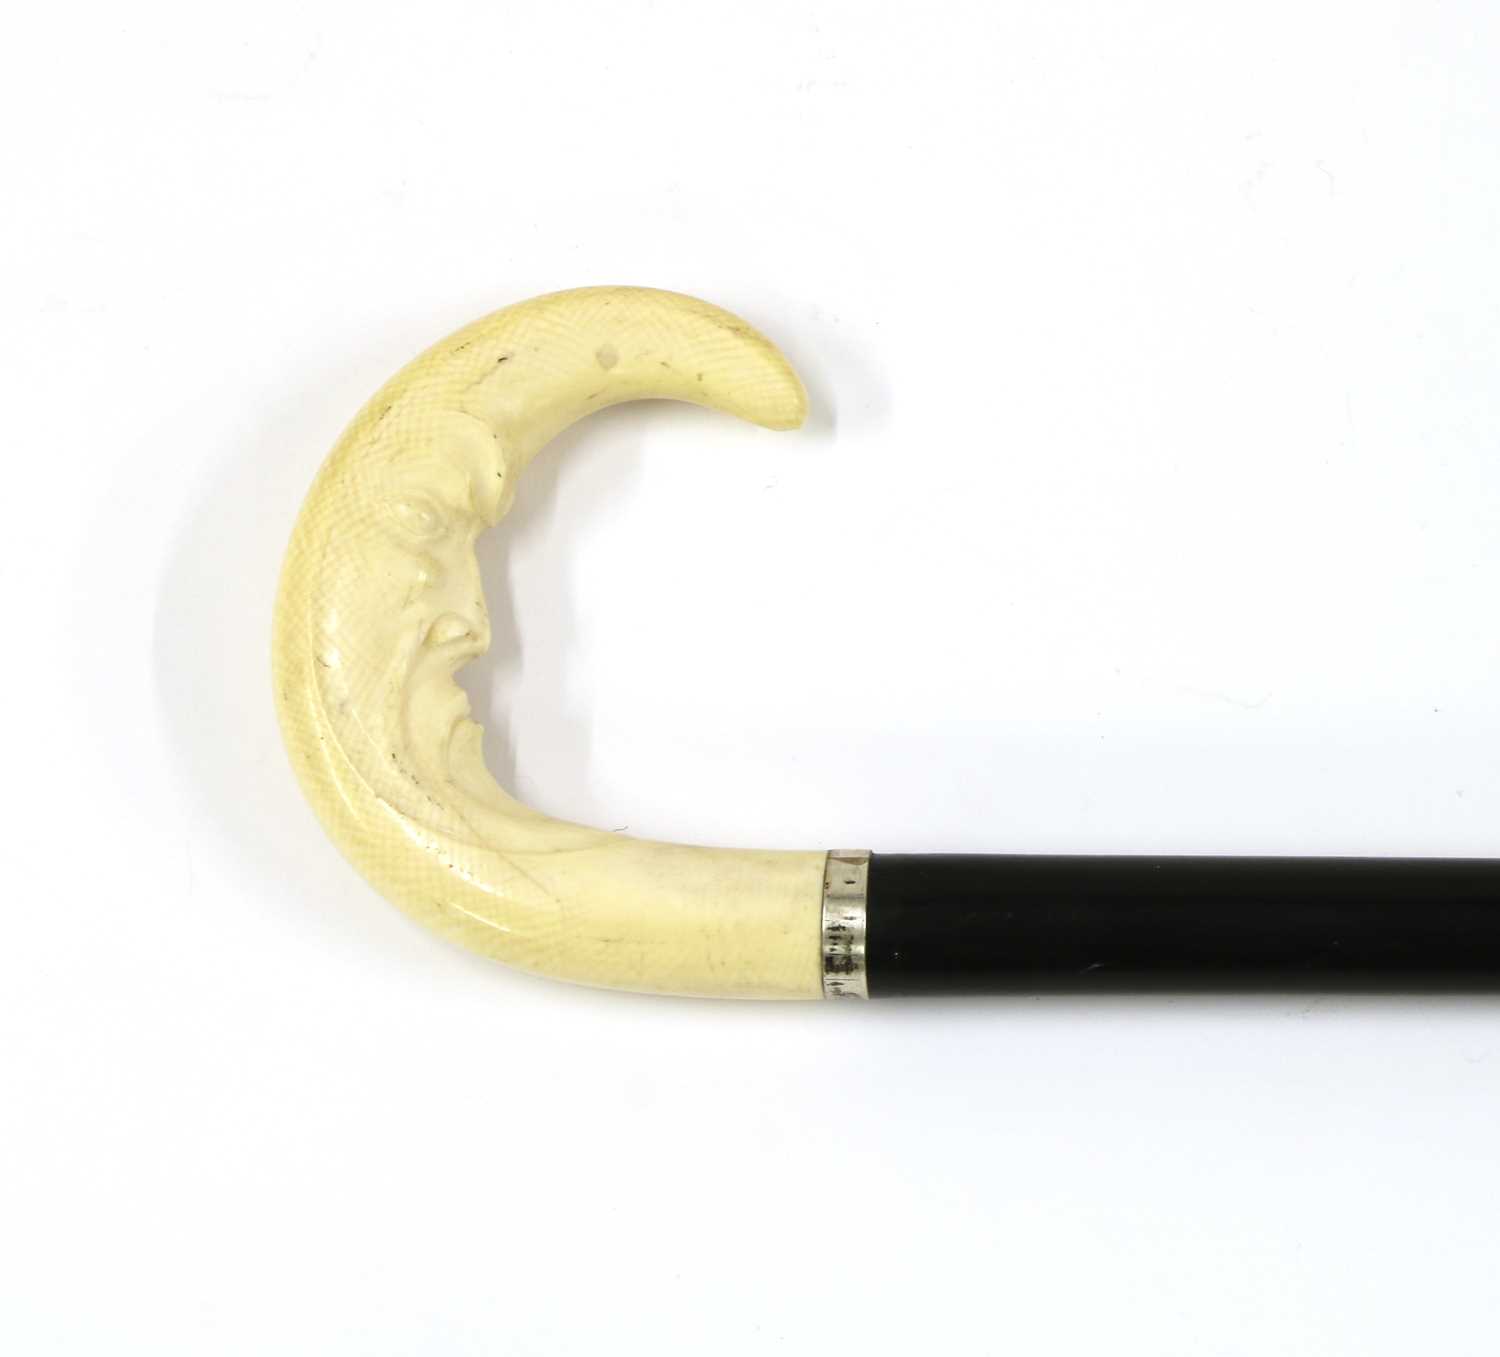 Lot 100 - A MAN IN THE MOON WALKING CANE